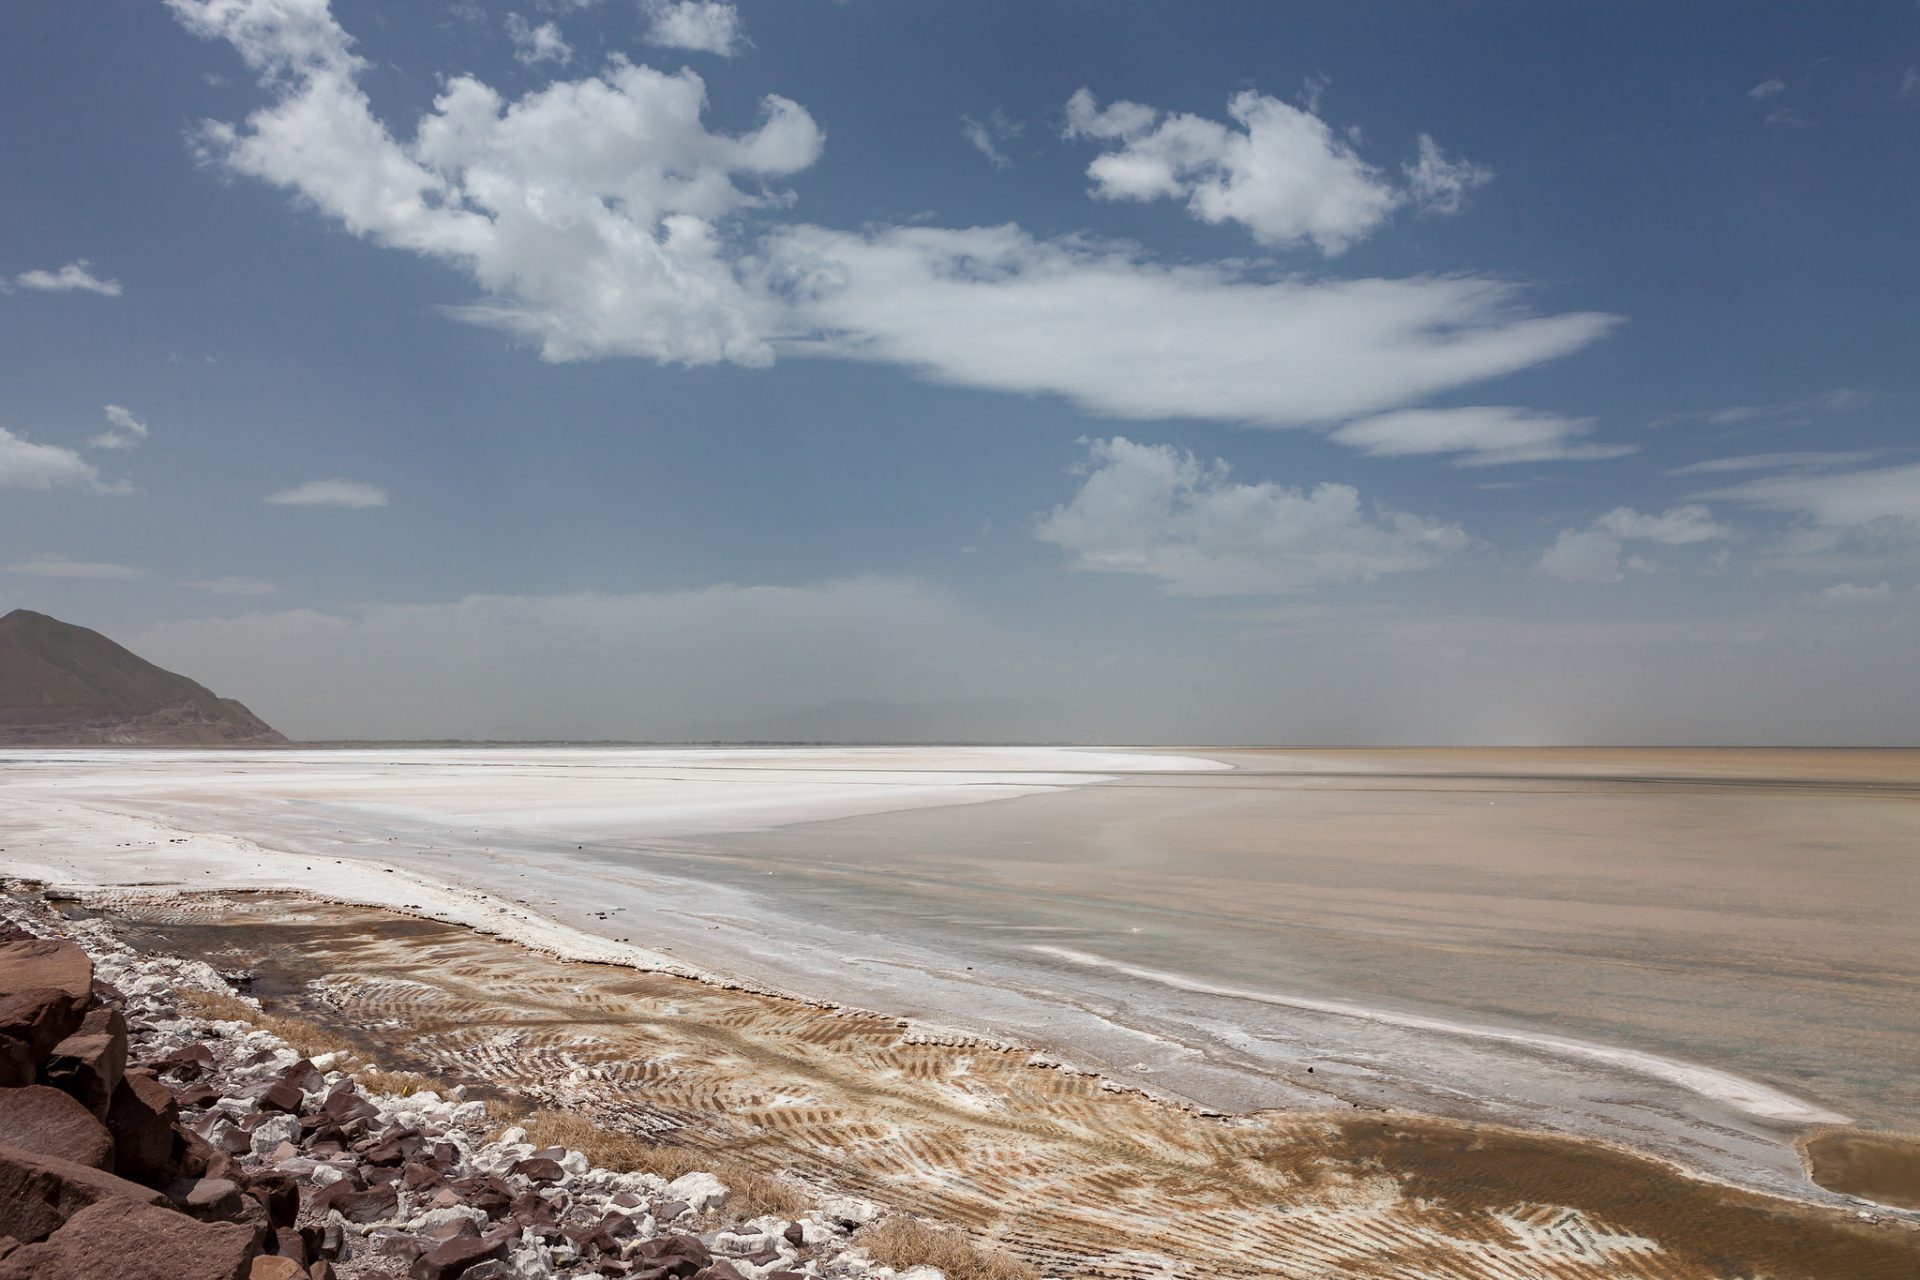 Lake Urmia, along with its once approximately 102 islands, is protected as a national park. / Australia Iran